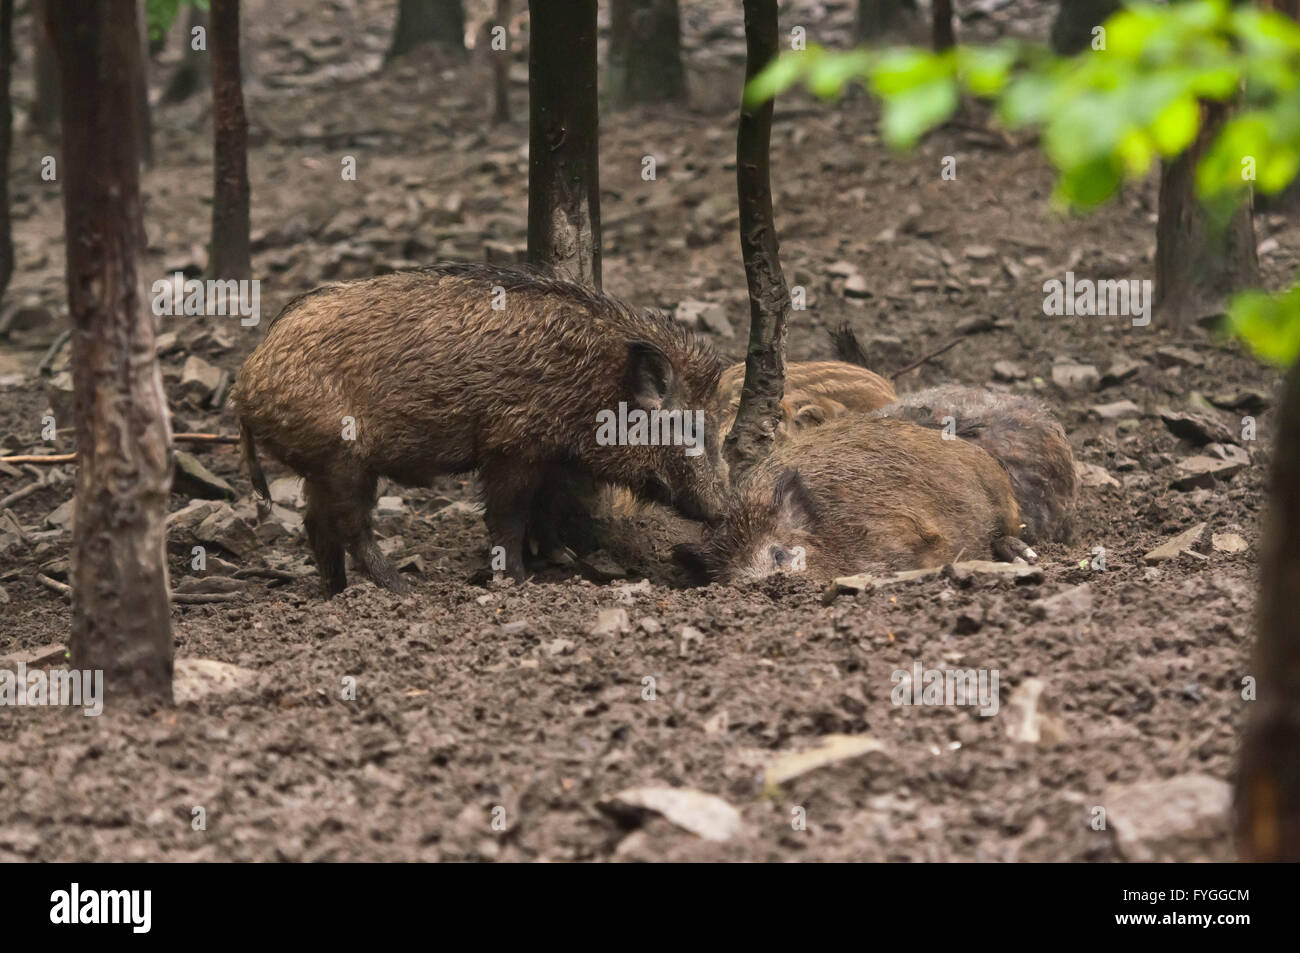 wild boar family in their natural environment Stock Photo